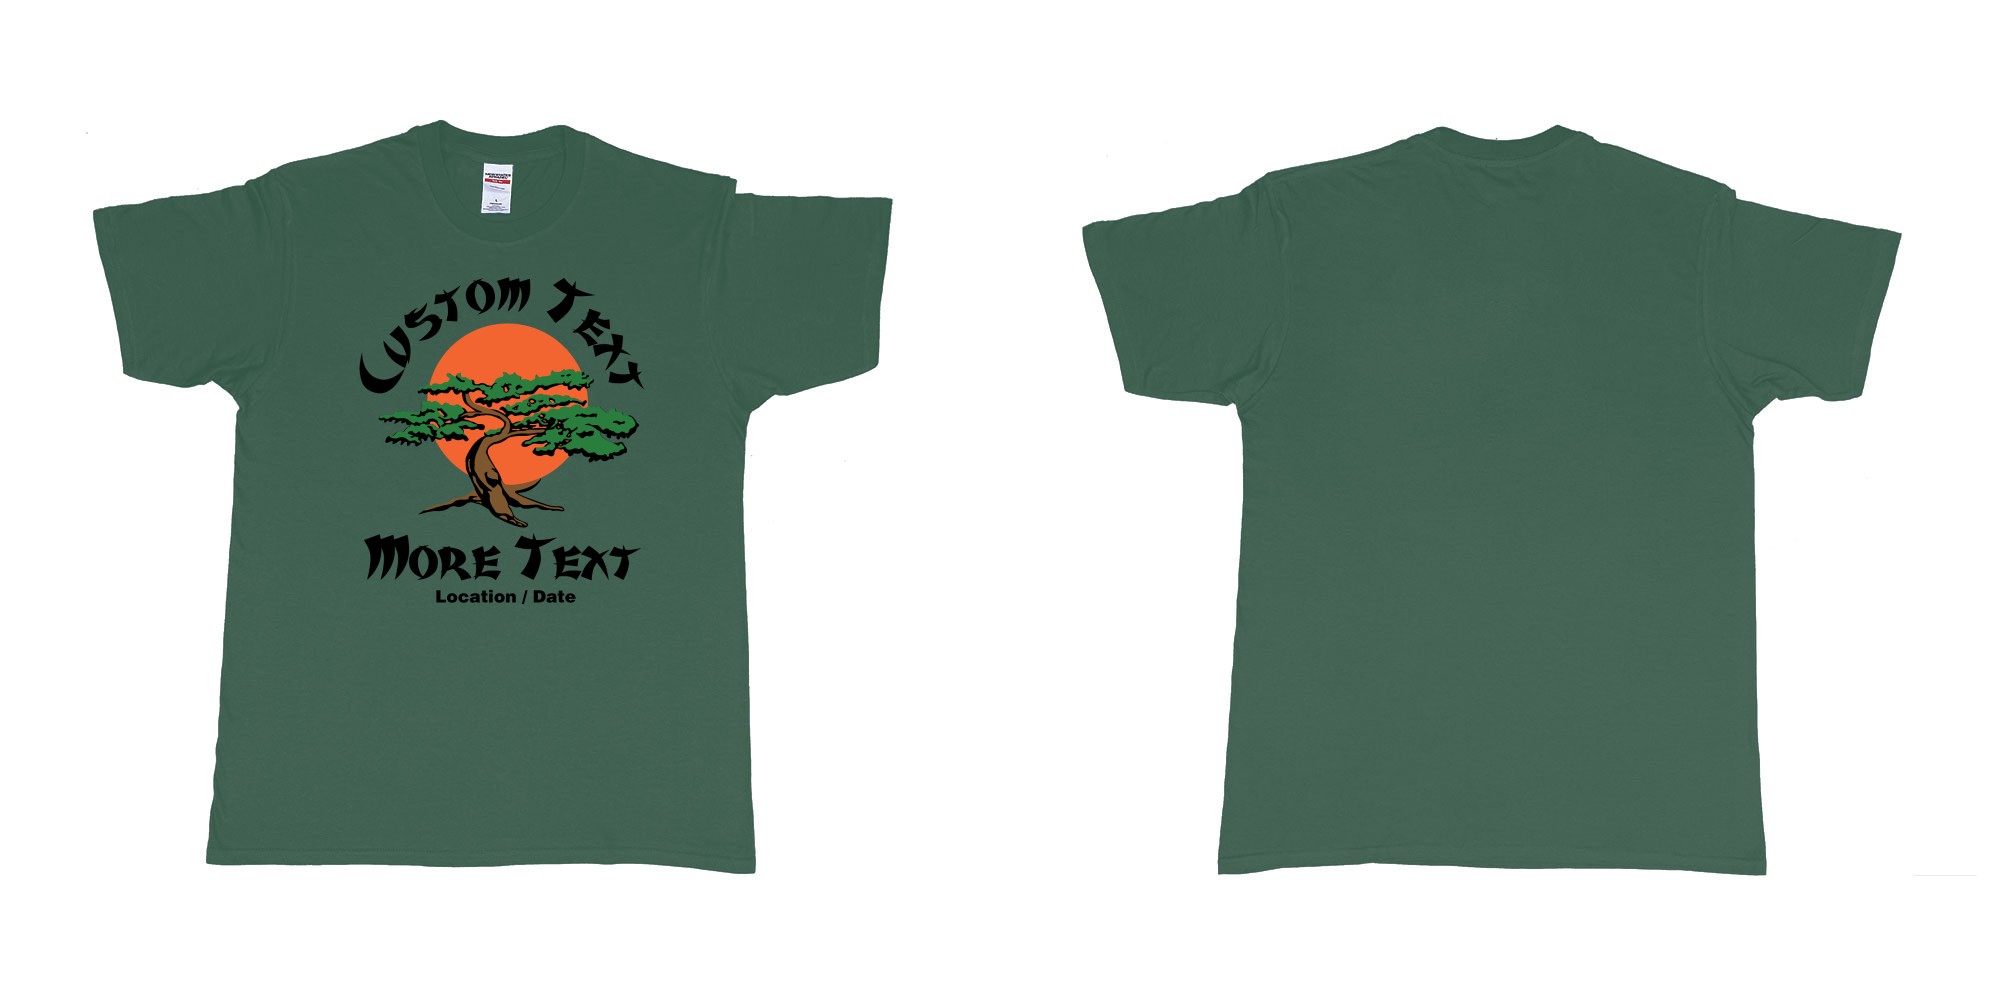 Custom tshirt design karate kid miyagi dojo karate logo custom text in fabric color forest-green choice your own text made in Bali by The Pirate Way